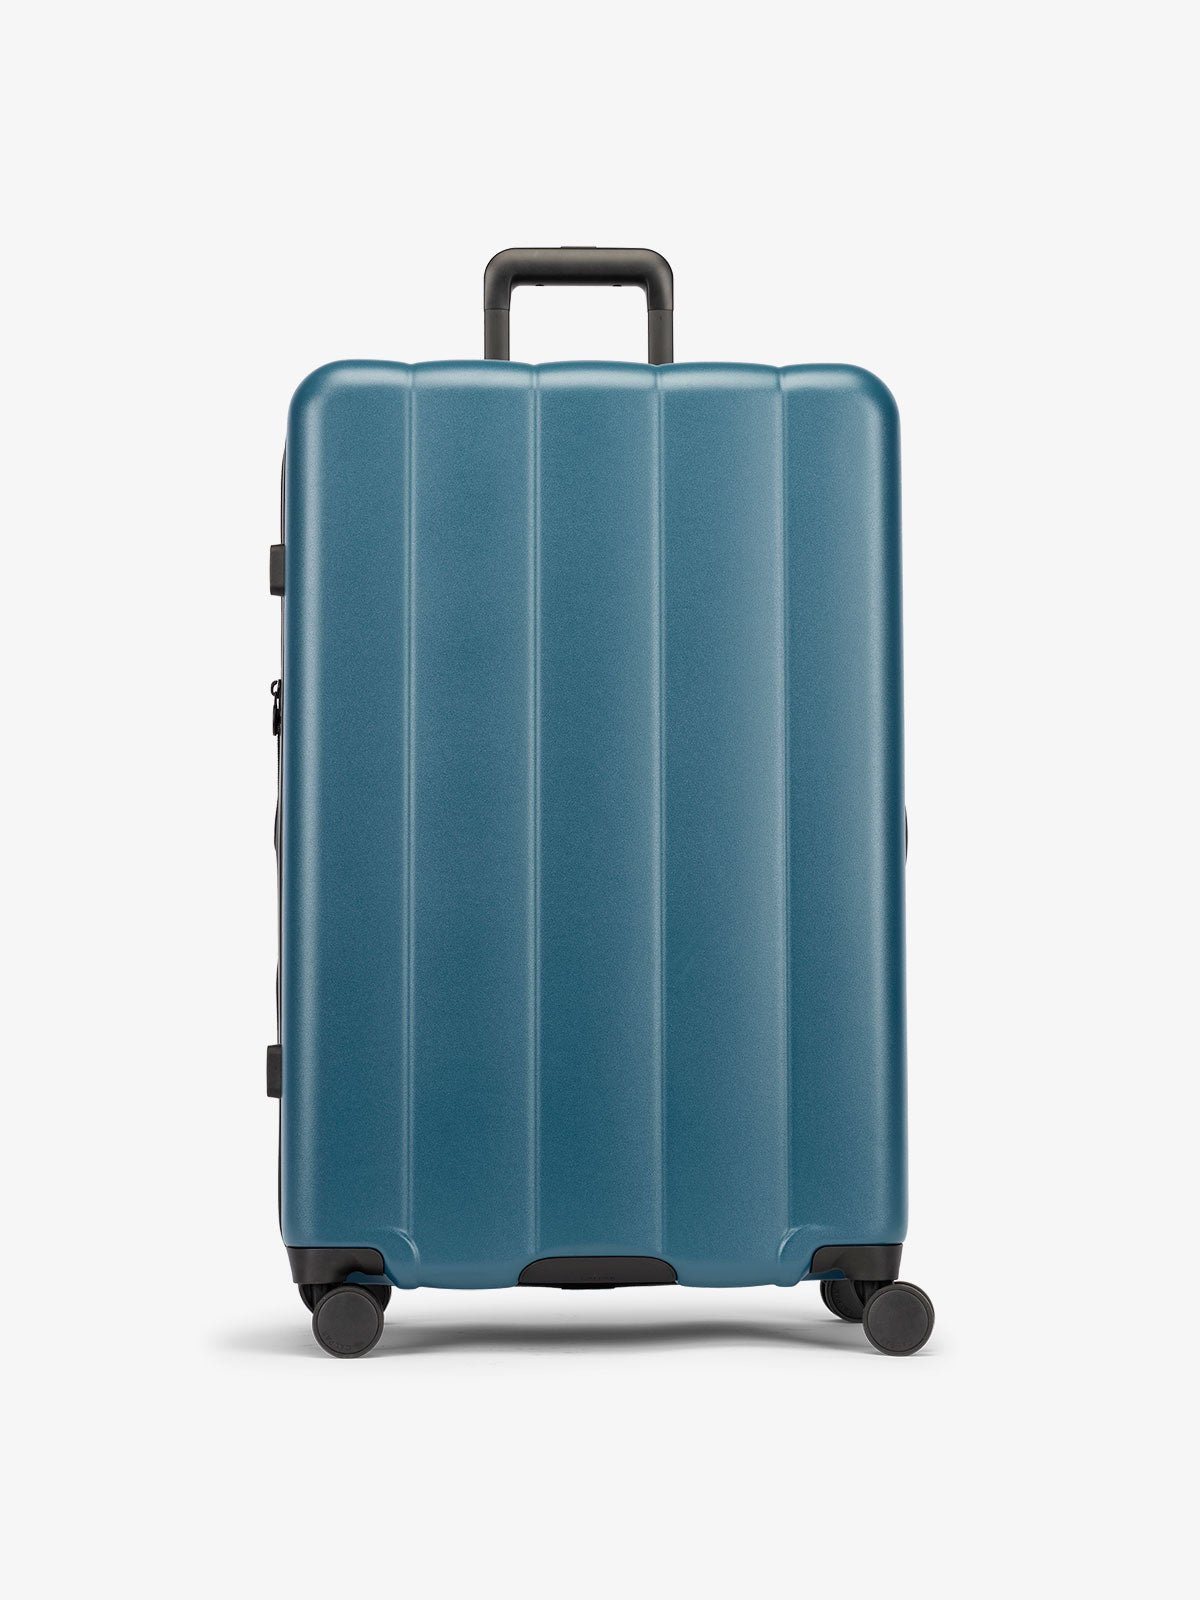 Pacific blue large luggage made from an ultra-durable polycarbonate shell and expandable by up to 2"